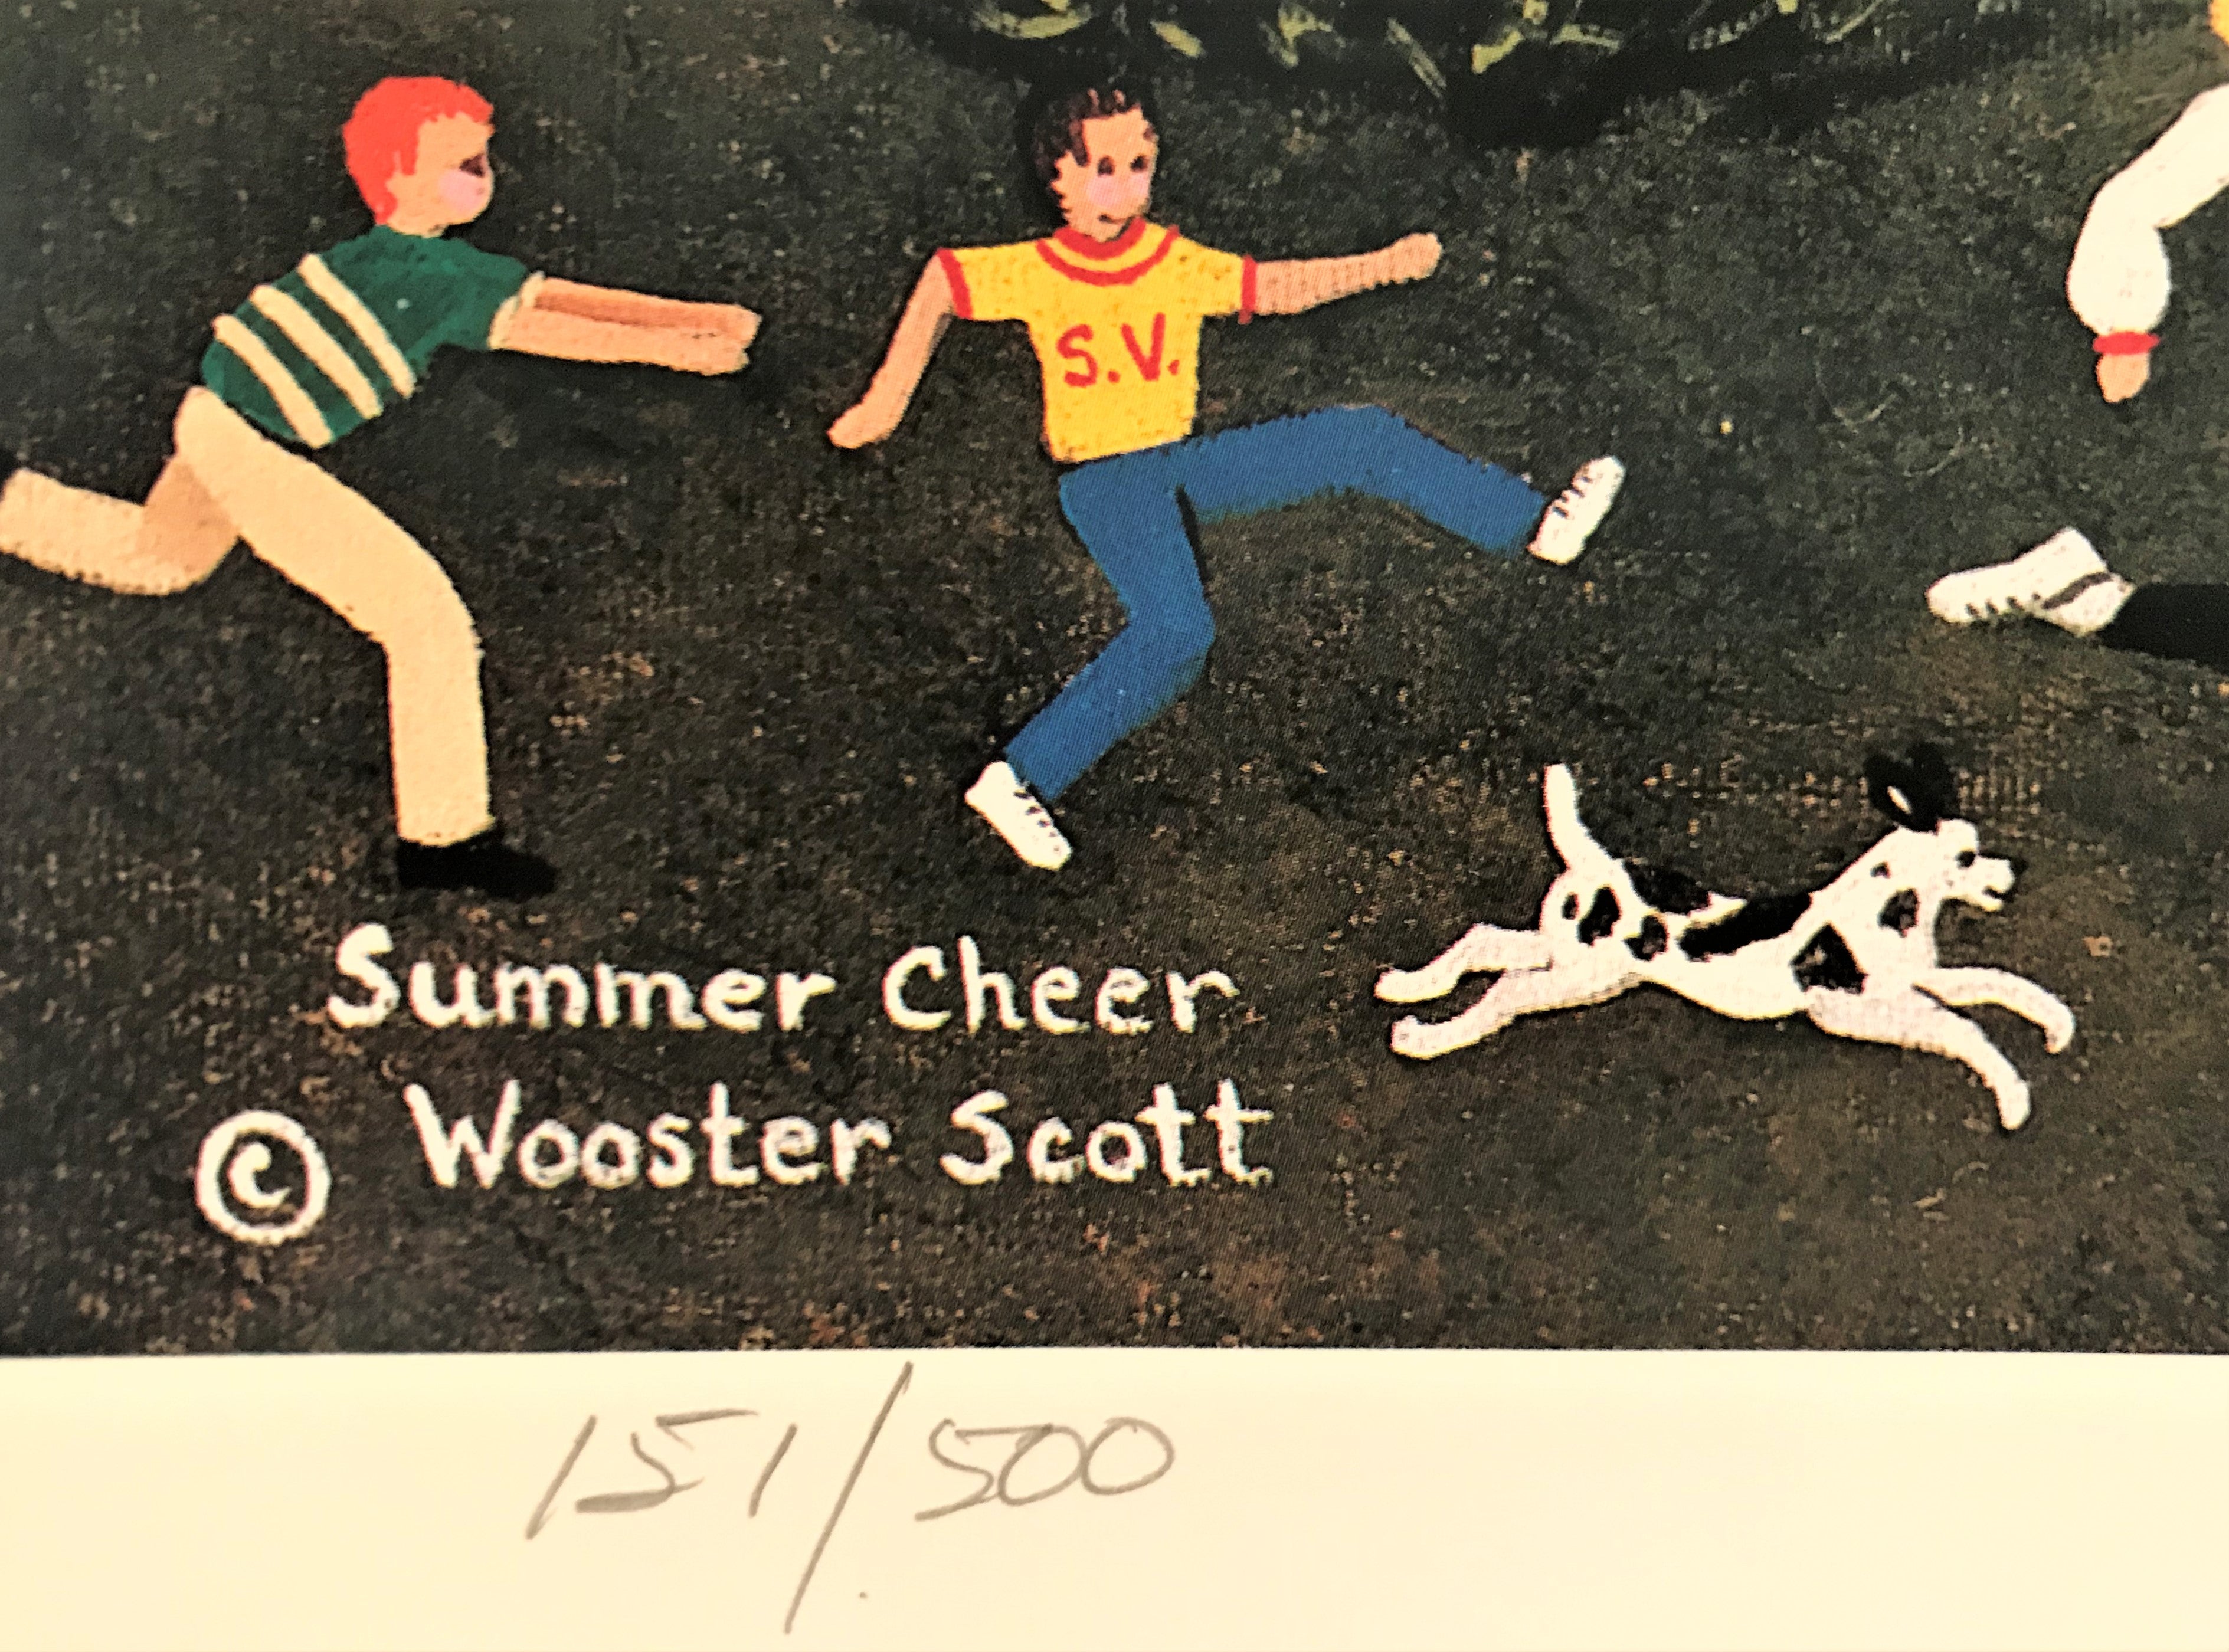 Summer Cheer Jane Wooster Scott Offset Lithograph Print Artist Hand Signed and Numbered